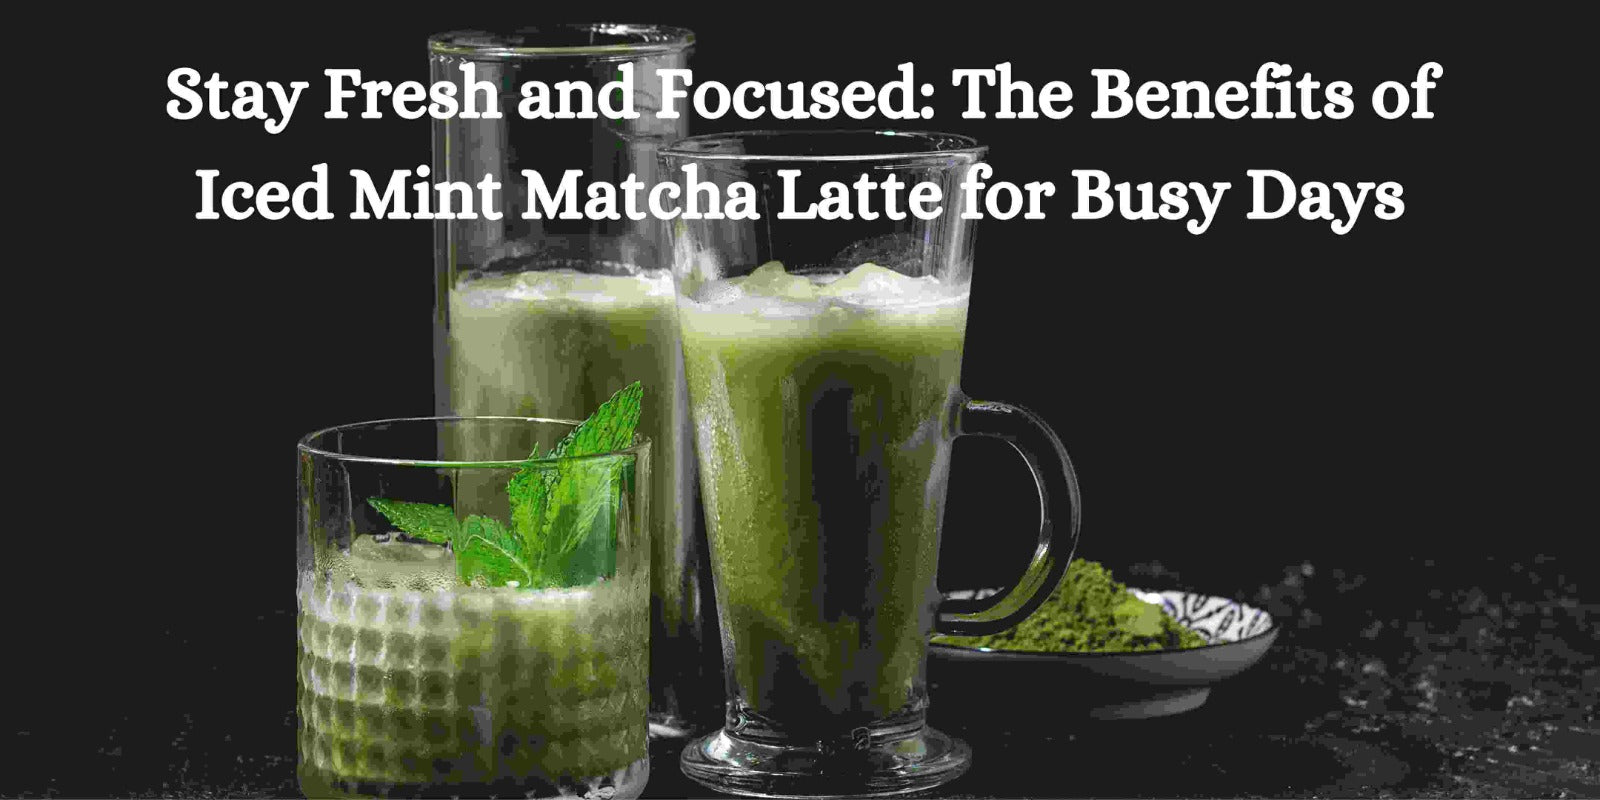 Stay Fresh and Focused: The Benefits of Iced Mint Matcha Latte for Busy Days